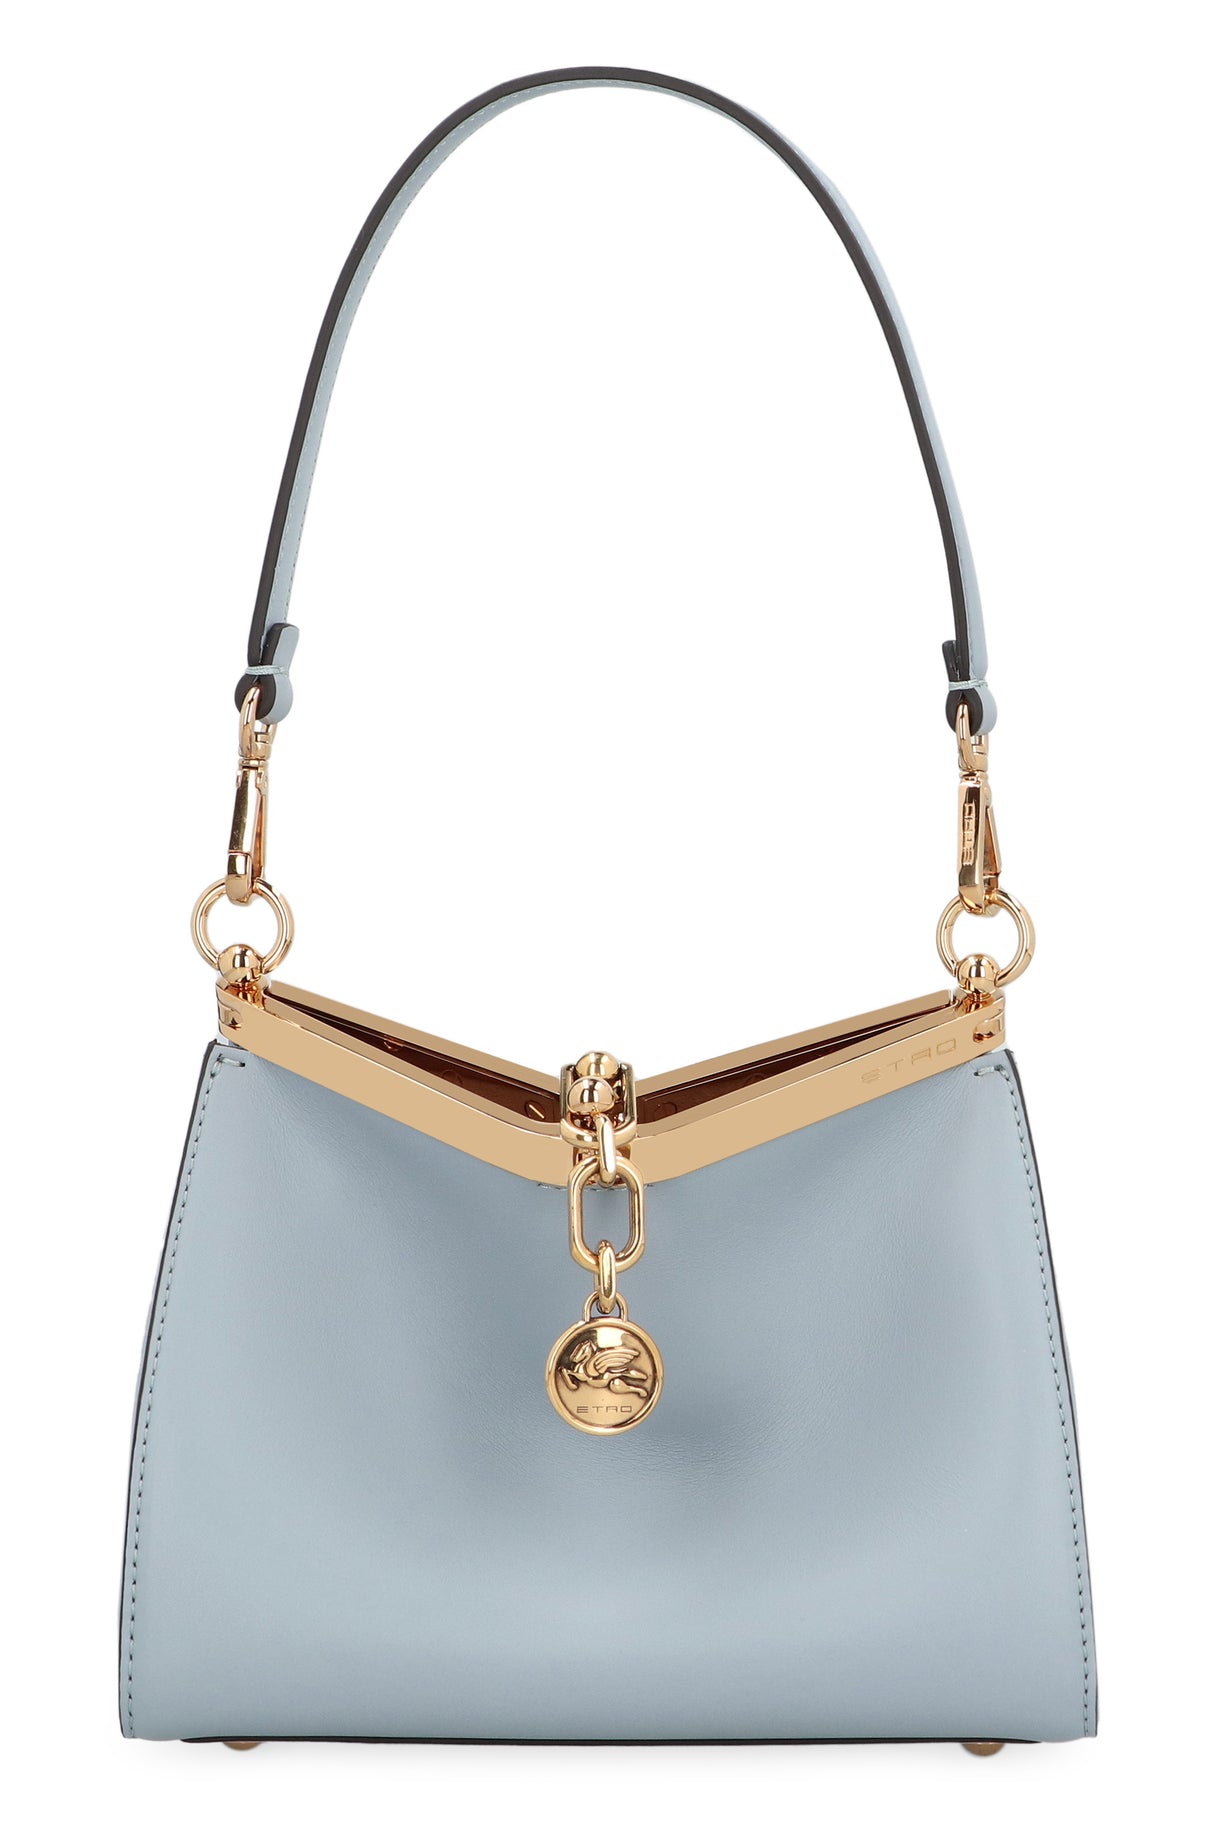 ETRO Chic Light Blue Mini Leather Shoulder Bag with Gold-Tone Accents and Suede Lining, 21x16x9 cm